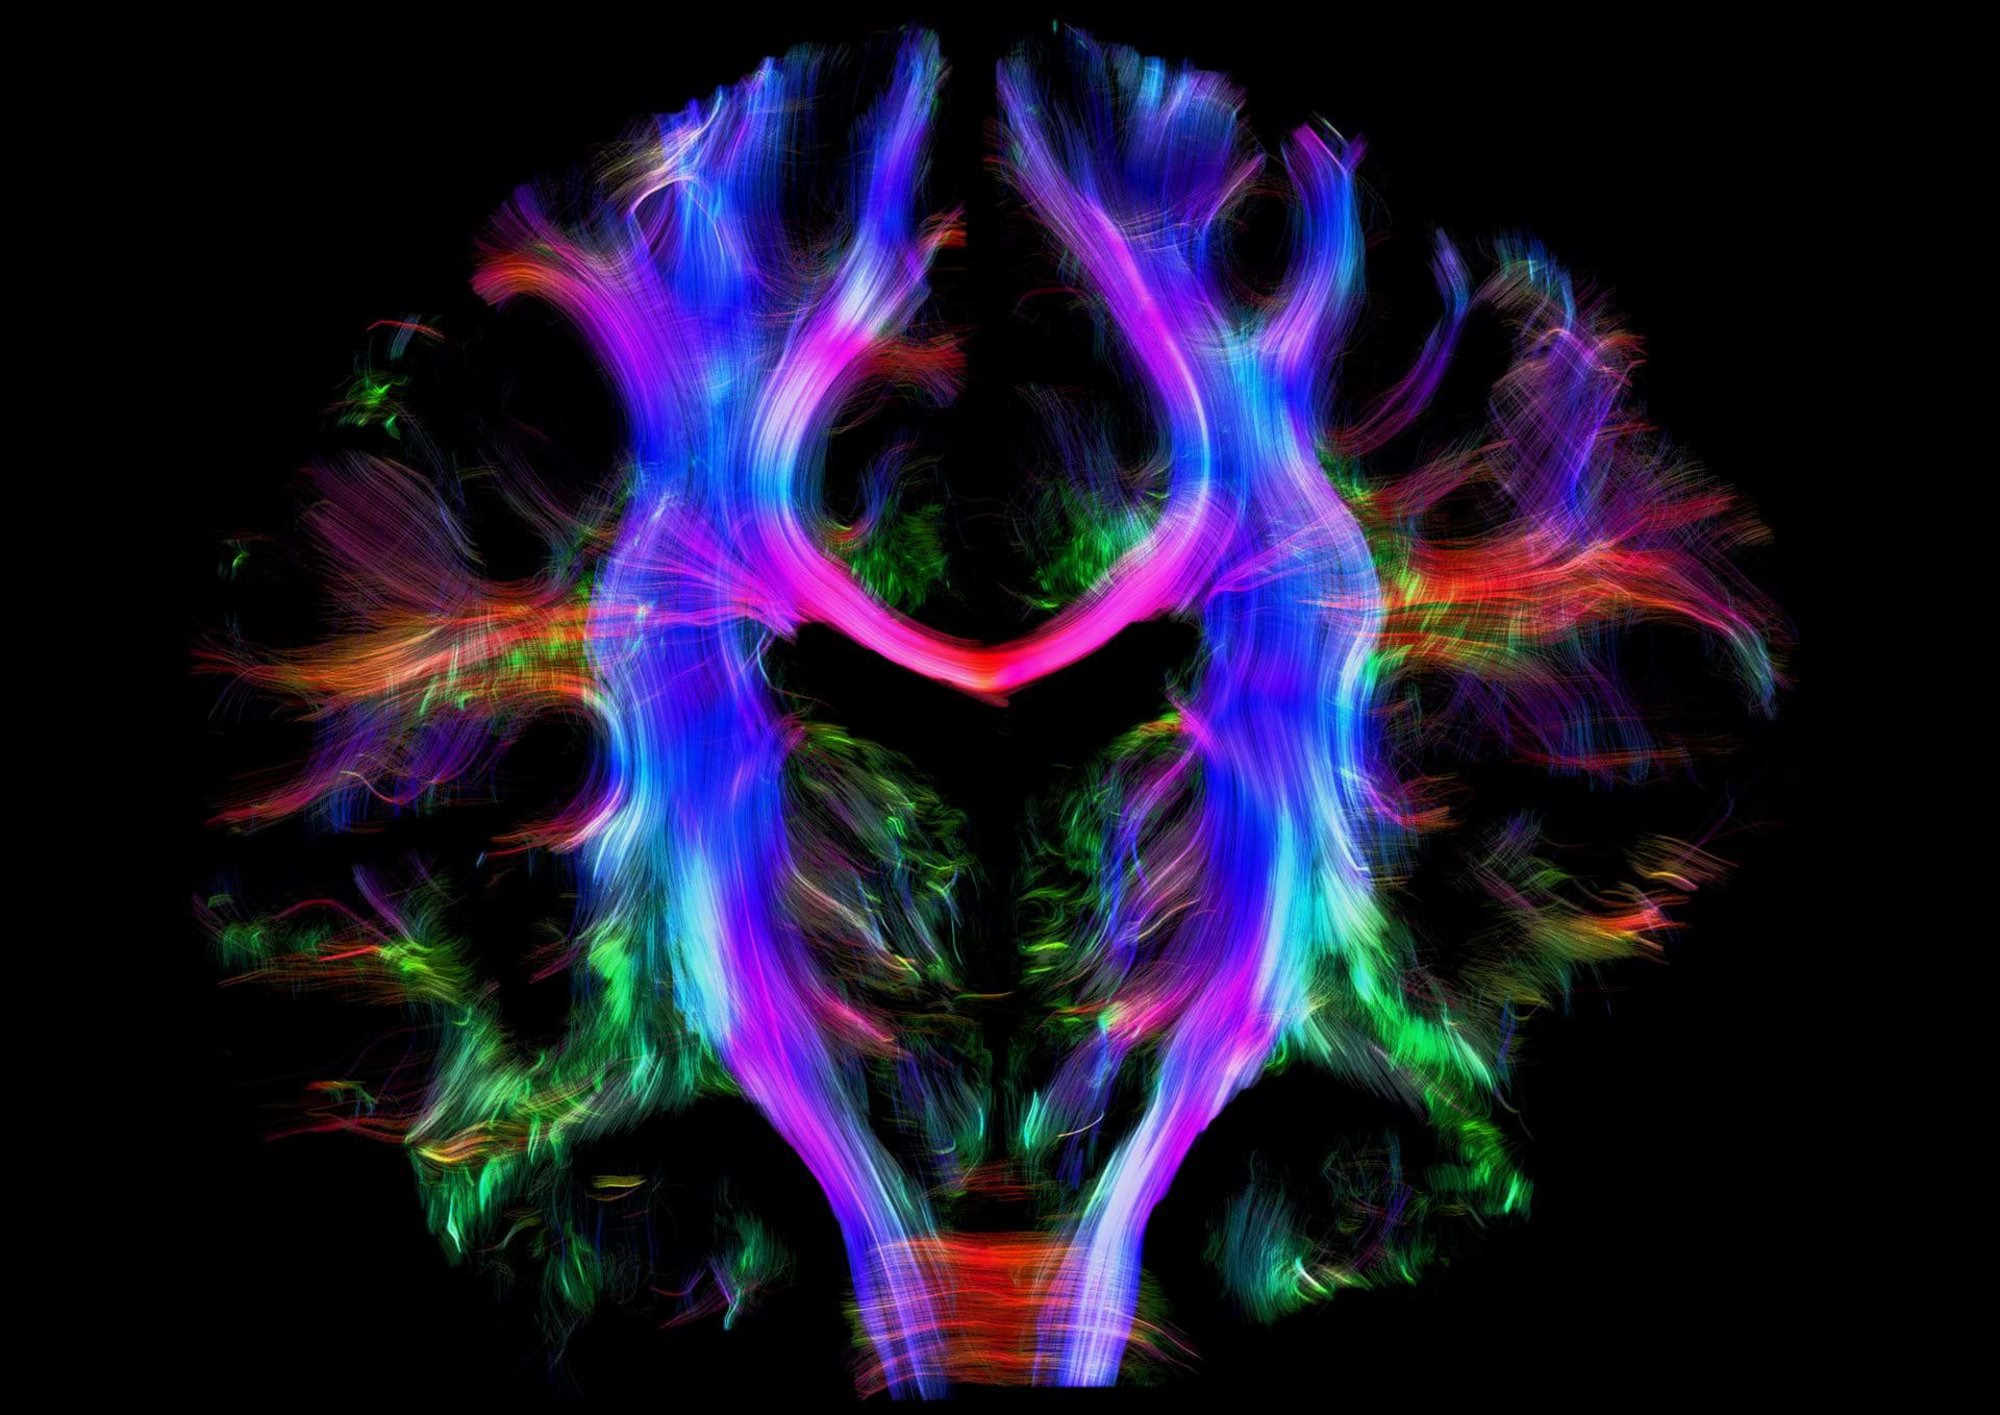 Pathways of nerve fibres – long, slender projections of nerve cells, also known as neurons – connecting in the brain of a young adult. This tractography image was created using a type of magnetic resonance imaging (MRI) at the Max Planck Institute for Human Cognitive and Brain Sciences. © Alfred Awander. CC-BY